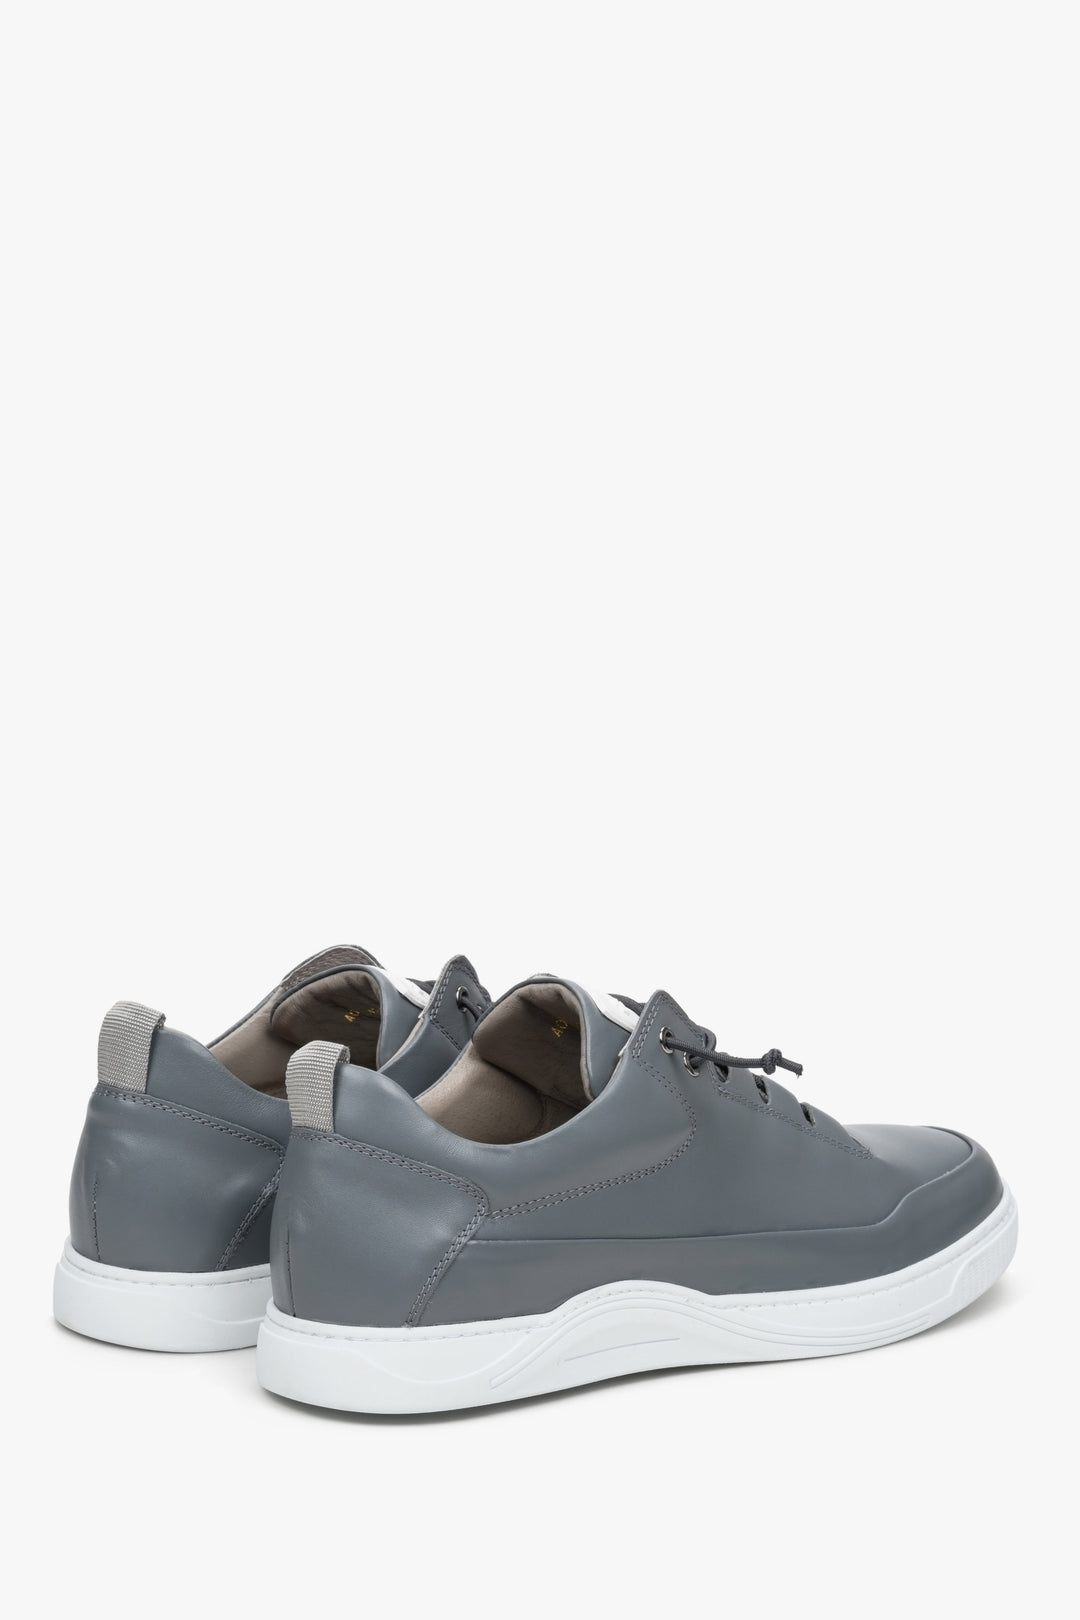 Men's grey sneakers ES 8 made of genuine leather - close-up on the heel and the side part of the shoe's sole.